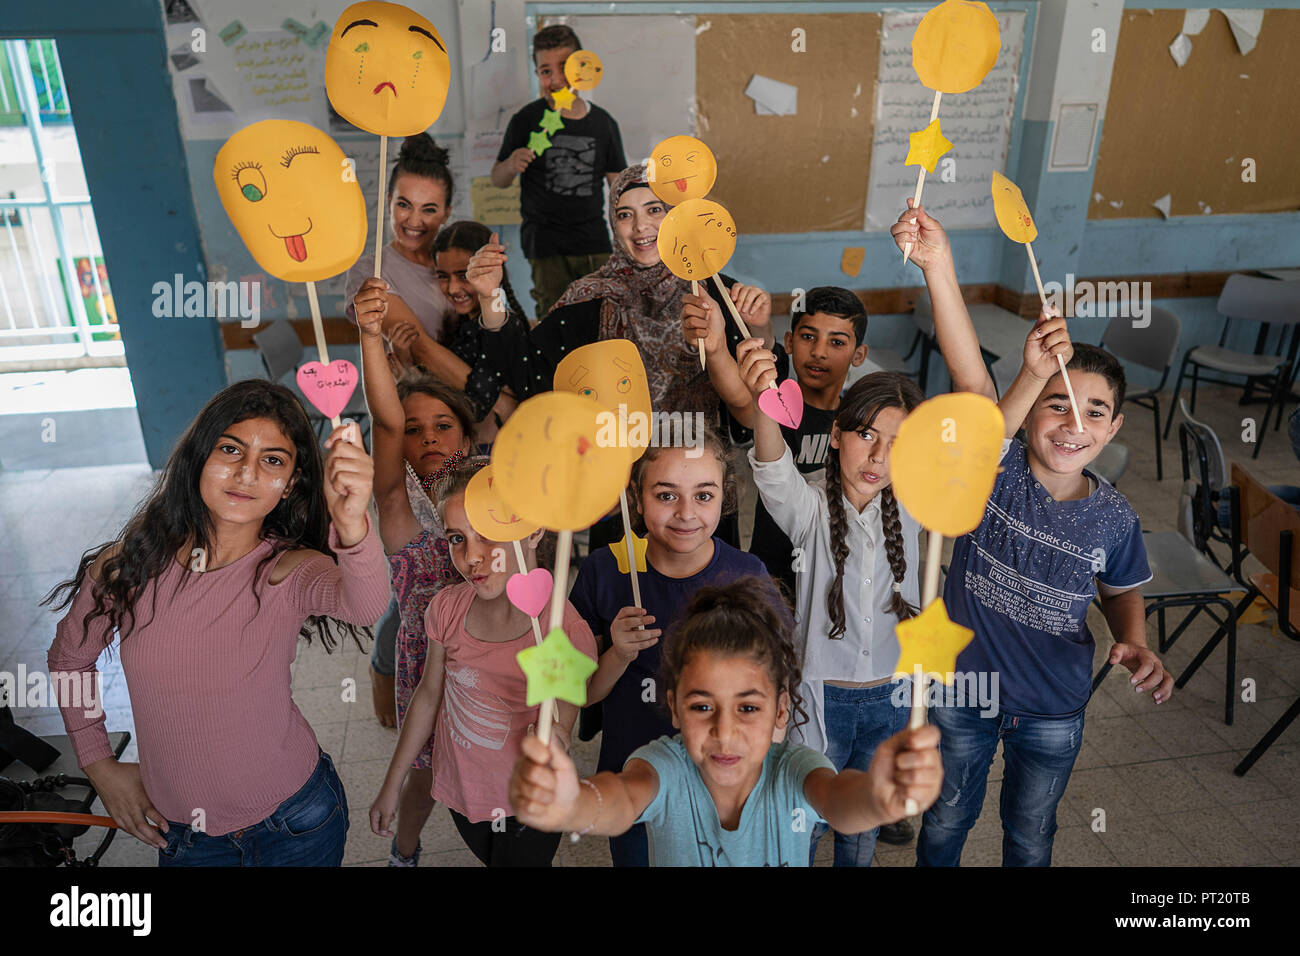 Bethlehem, Palestine. 8th Feb, 2018. Children are seen holding their emotion faces in the arts and crafts class during the summer camp.The Return Summer Camp was organised for children of the Aida refugee camp, it was established in 1950 by the Palestinians who were expelled from their homes from 27 towns throughout Palestine, namely Nasra, Tabaria, Jerusalem, Acre, Jaffa, Haifa and Hebron. This is a 4th generation of refugees, 130 children ranging from 4 to 16 years of age being overlooked by 20 instructors and volunteers and it was funded by the UN until 2000. (Credit Image: © Enzo Tom Stock Photo